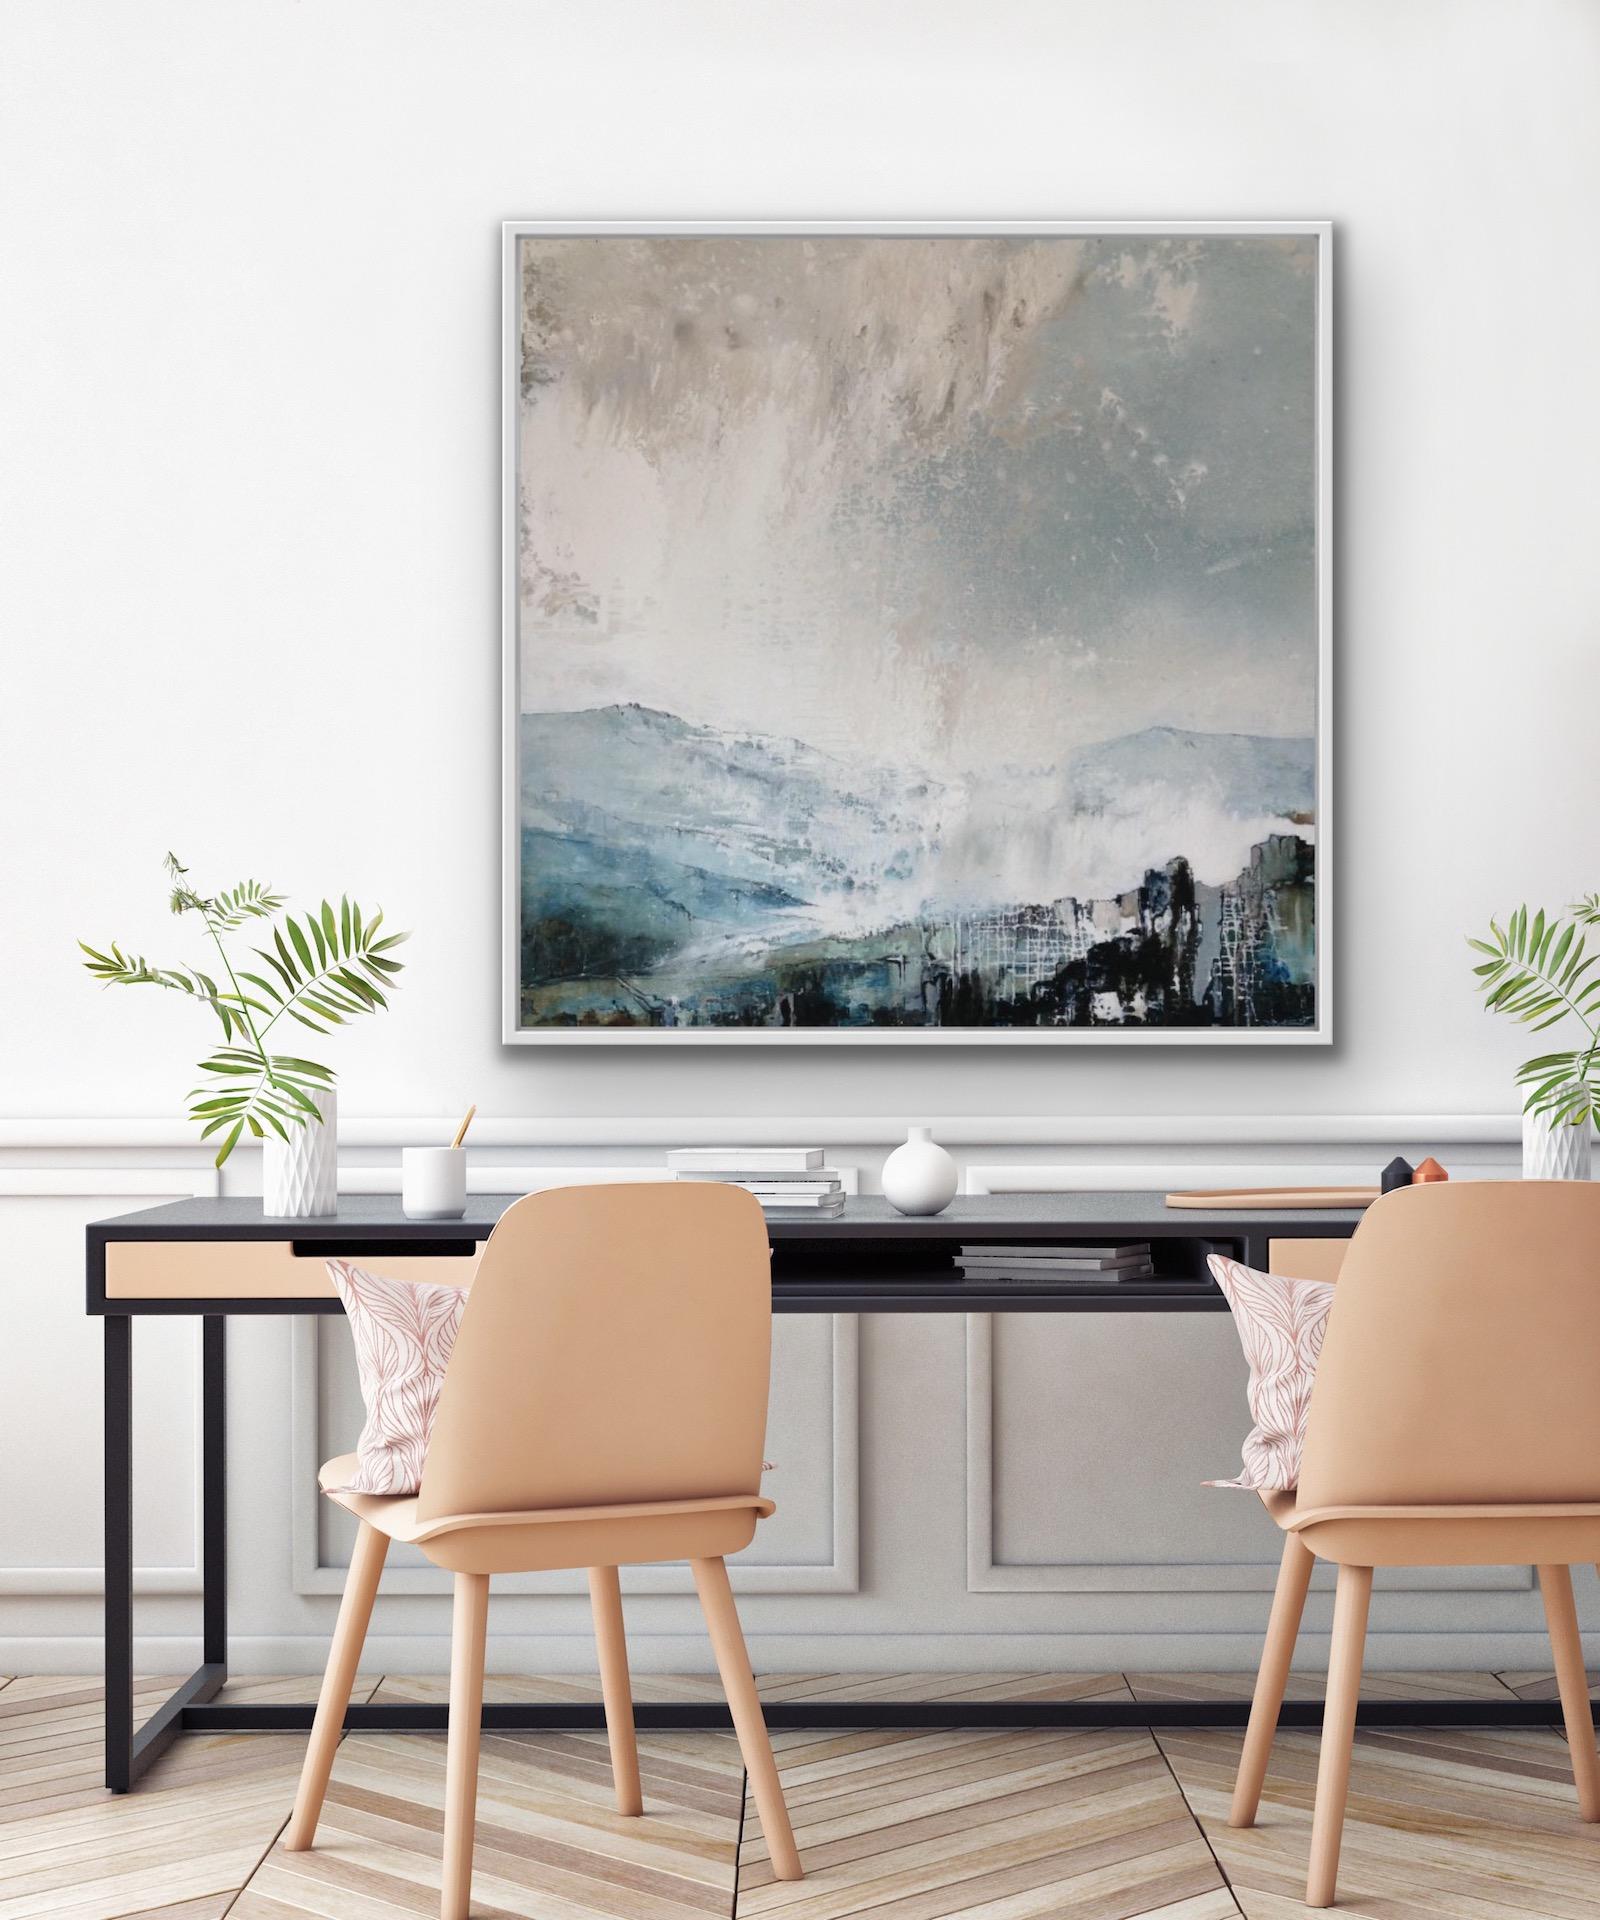 Delamore I [2021]
Original
Landscape
Acrylic On Canvas
Complete Size of Unframed Work: H:110 cm x W:110 cm x D:3cm
Sold Unframed
Please note that insitu images are purely an indication of how a piece may look

Delamore I is an original painting by